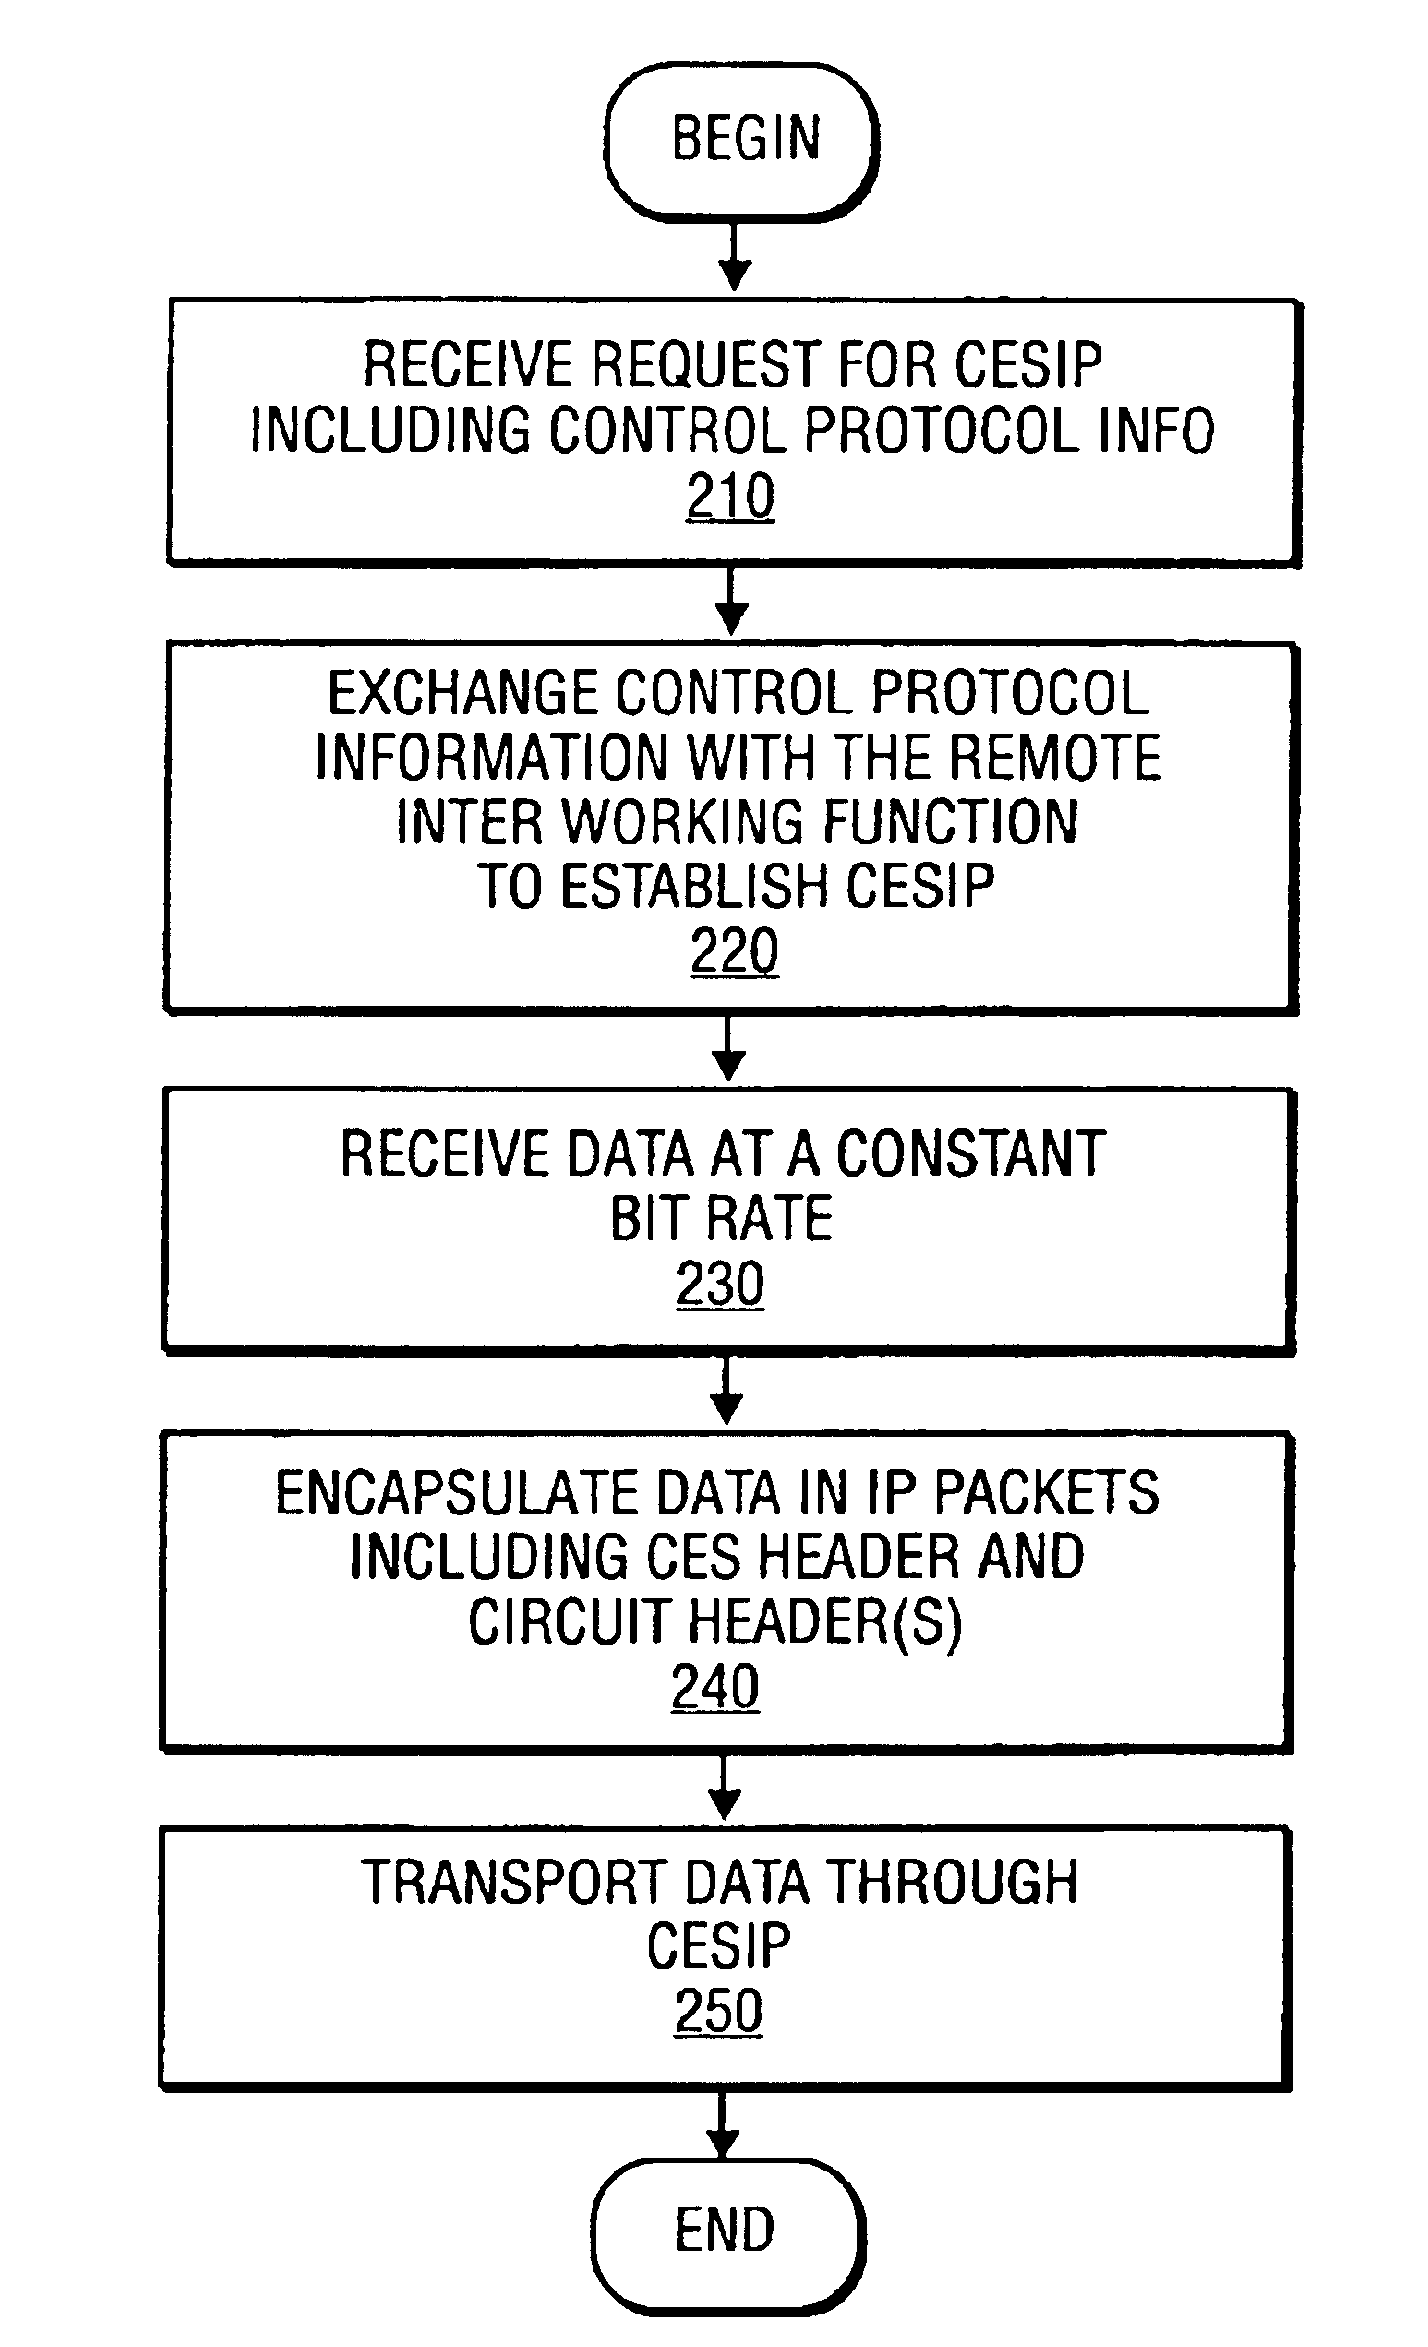 Circuit emulation service over an internet protocol network